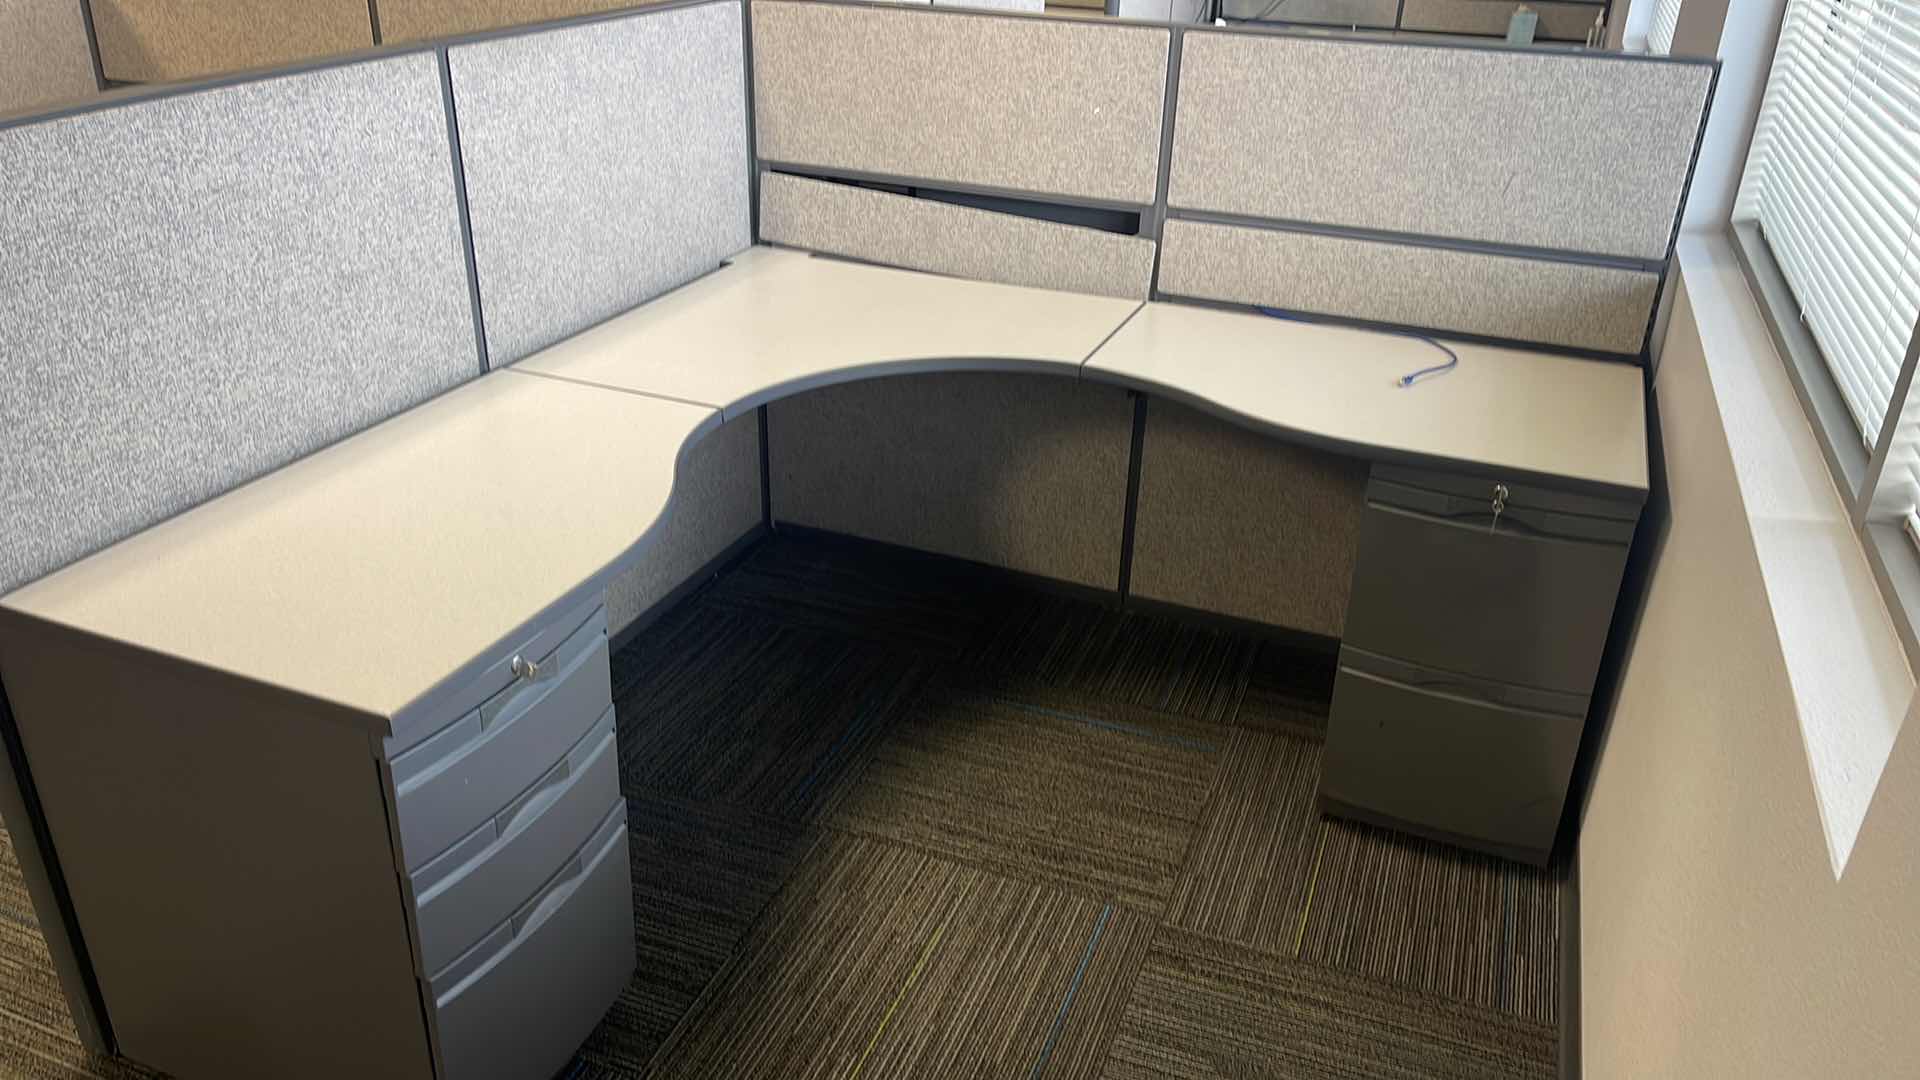 Photo 7 of 6 PC CUBICAL SET W 5 DRAWER MEDAL BASE DESKS 76” X 76” H50” (BUYER TO DISASSEMBLE & REMOVE FROM 2ND STORY OFFICE BUILDING W ELEVATOR)